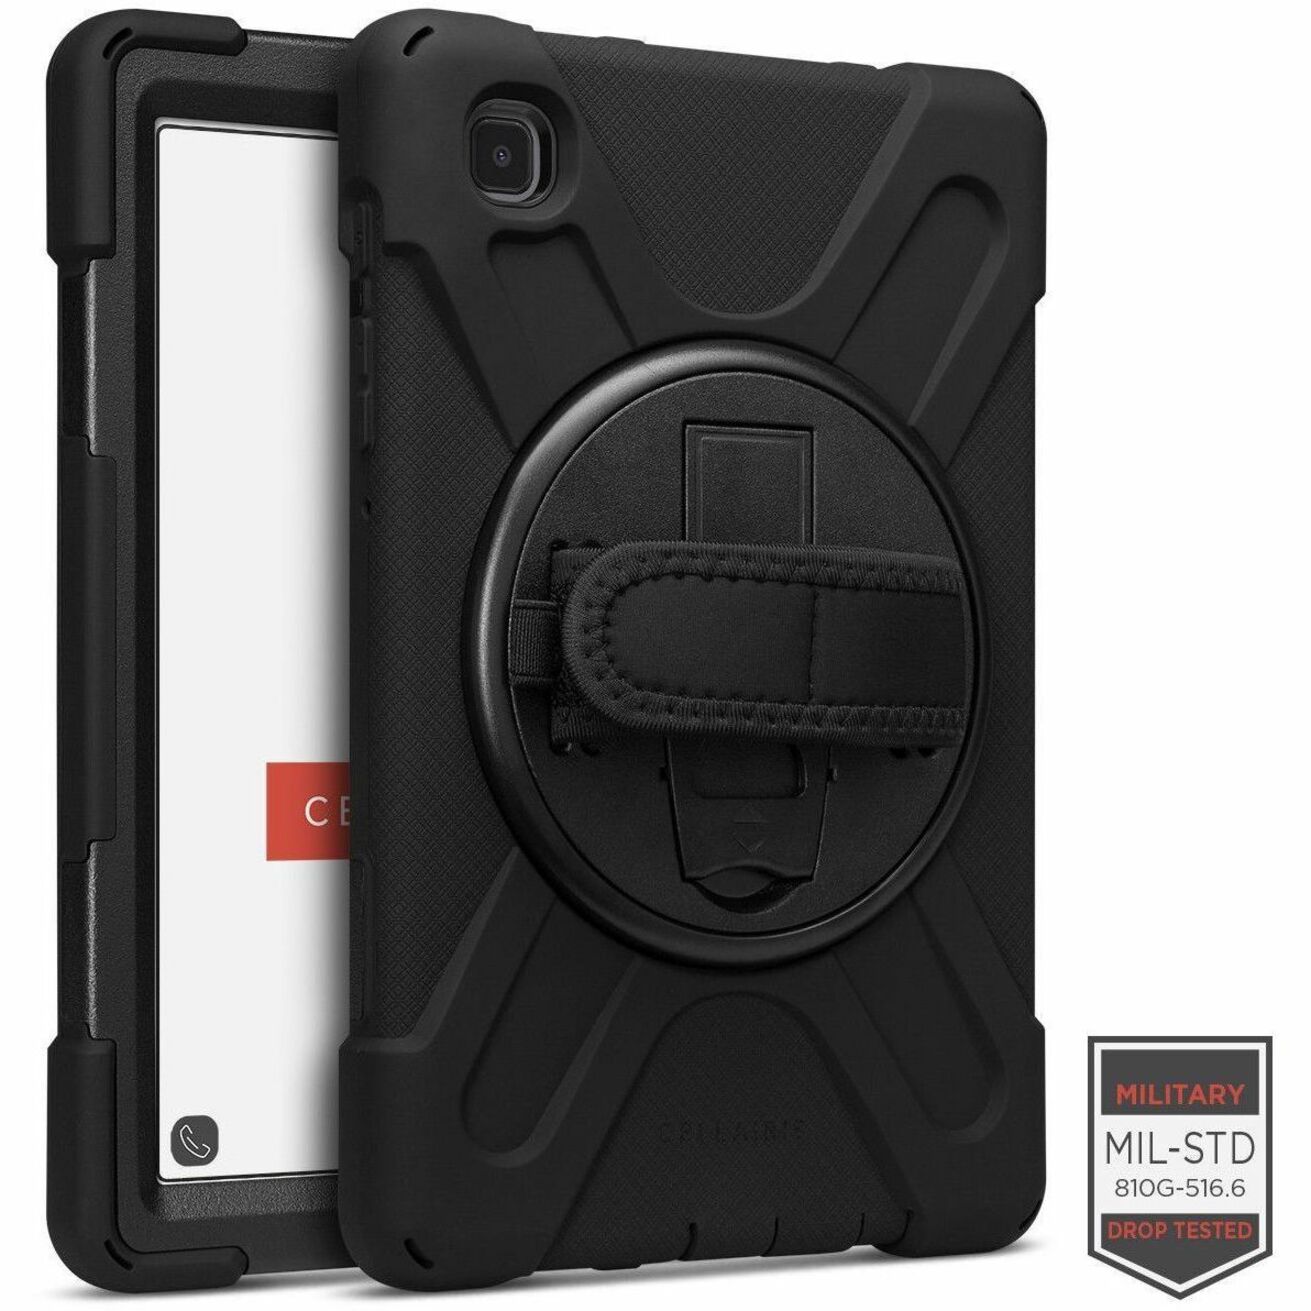 Cellairis Rapture Rugged Carrying Case for 8.7" Samsung Galaxy Tab A7 Lite Tablet (02-0420001)